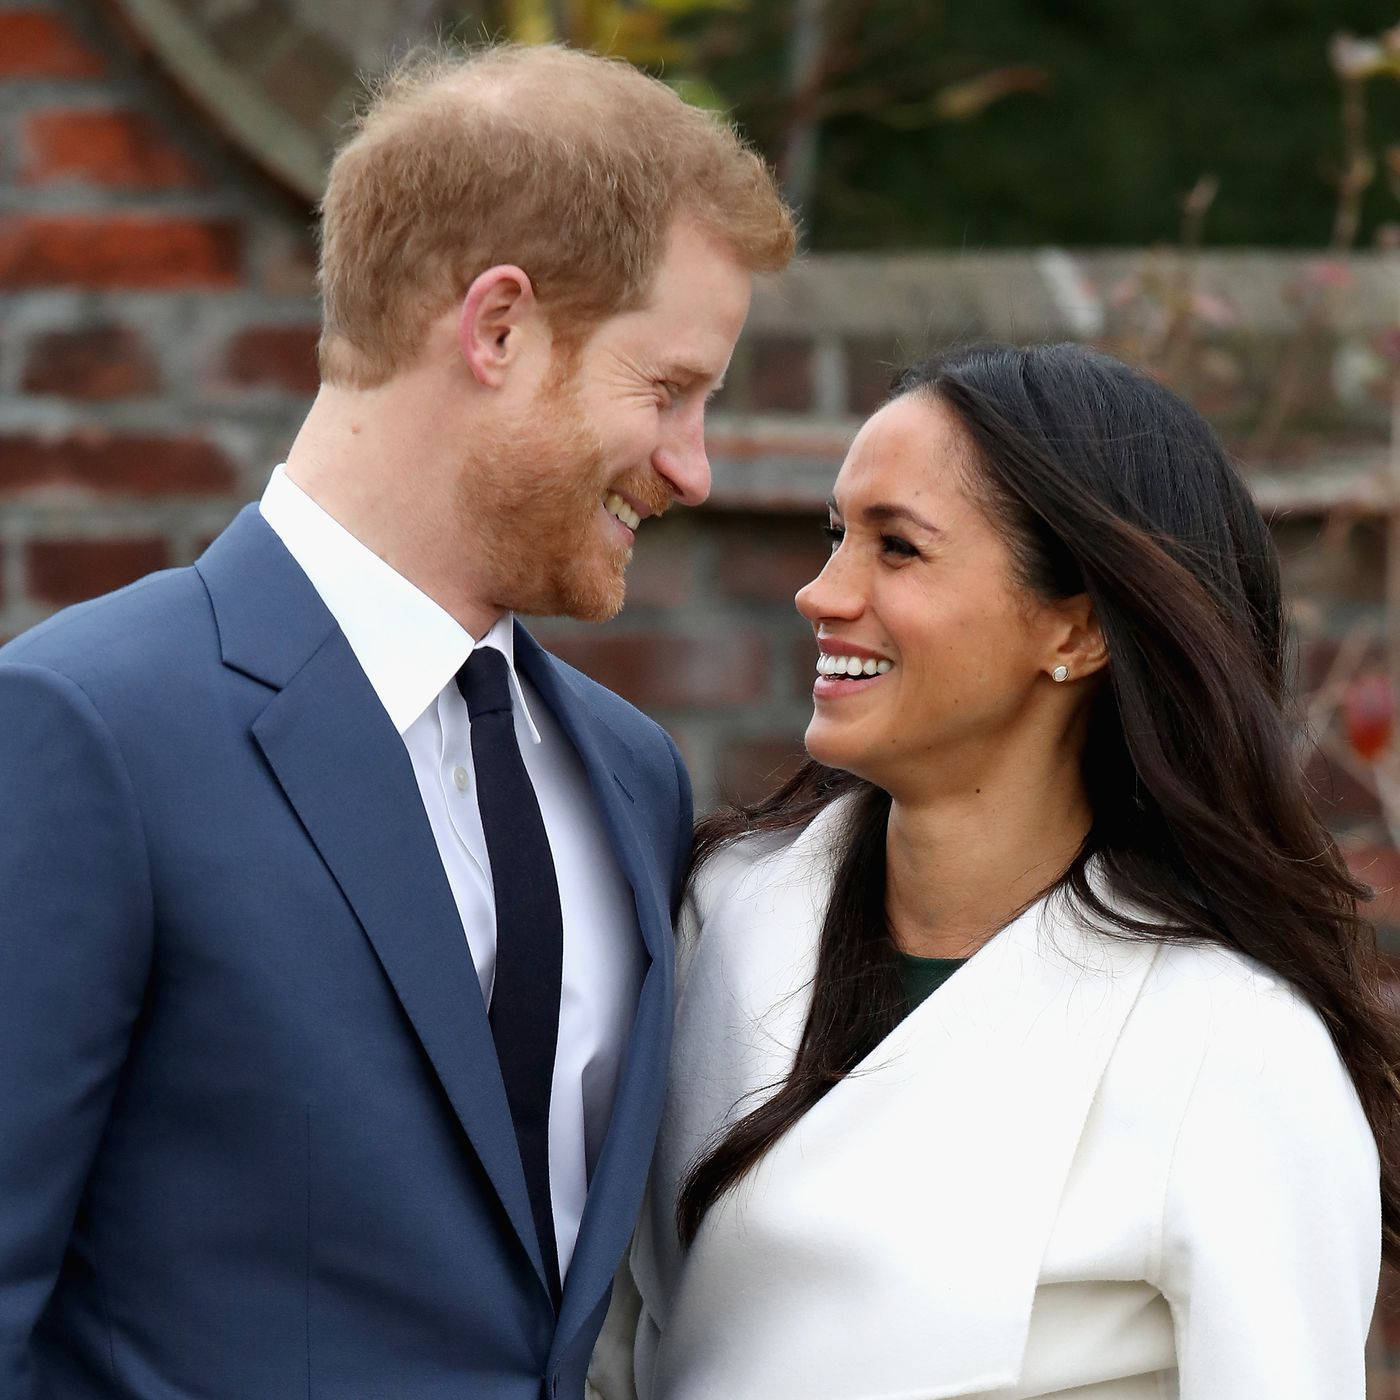 Prince Harry And Meghan Markle's Endearing Glance